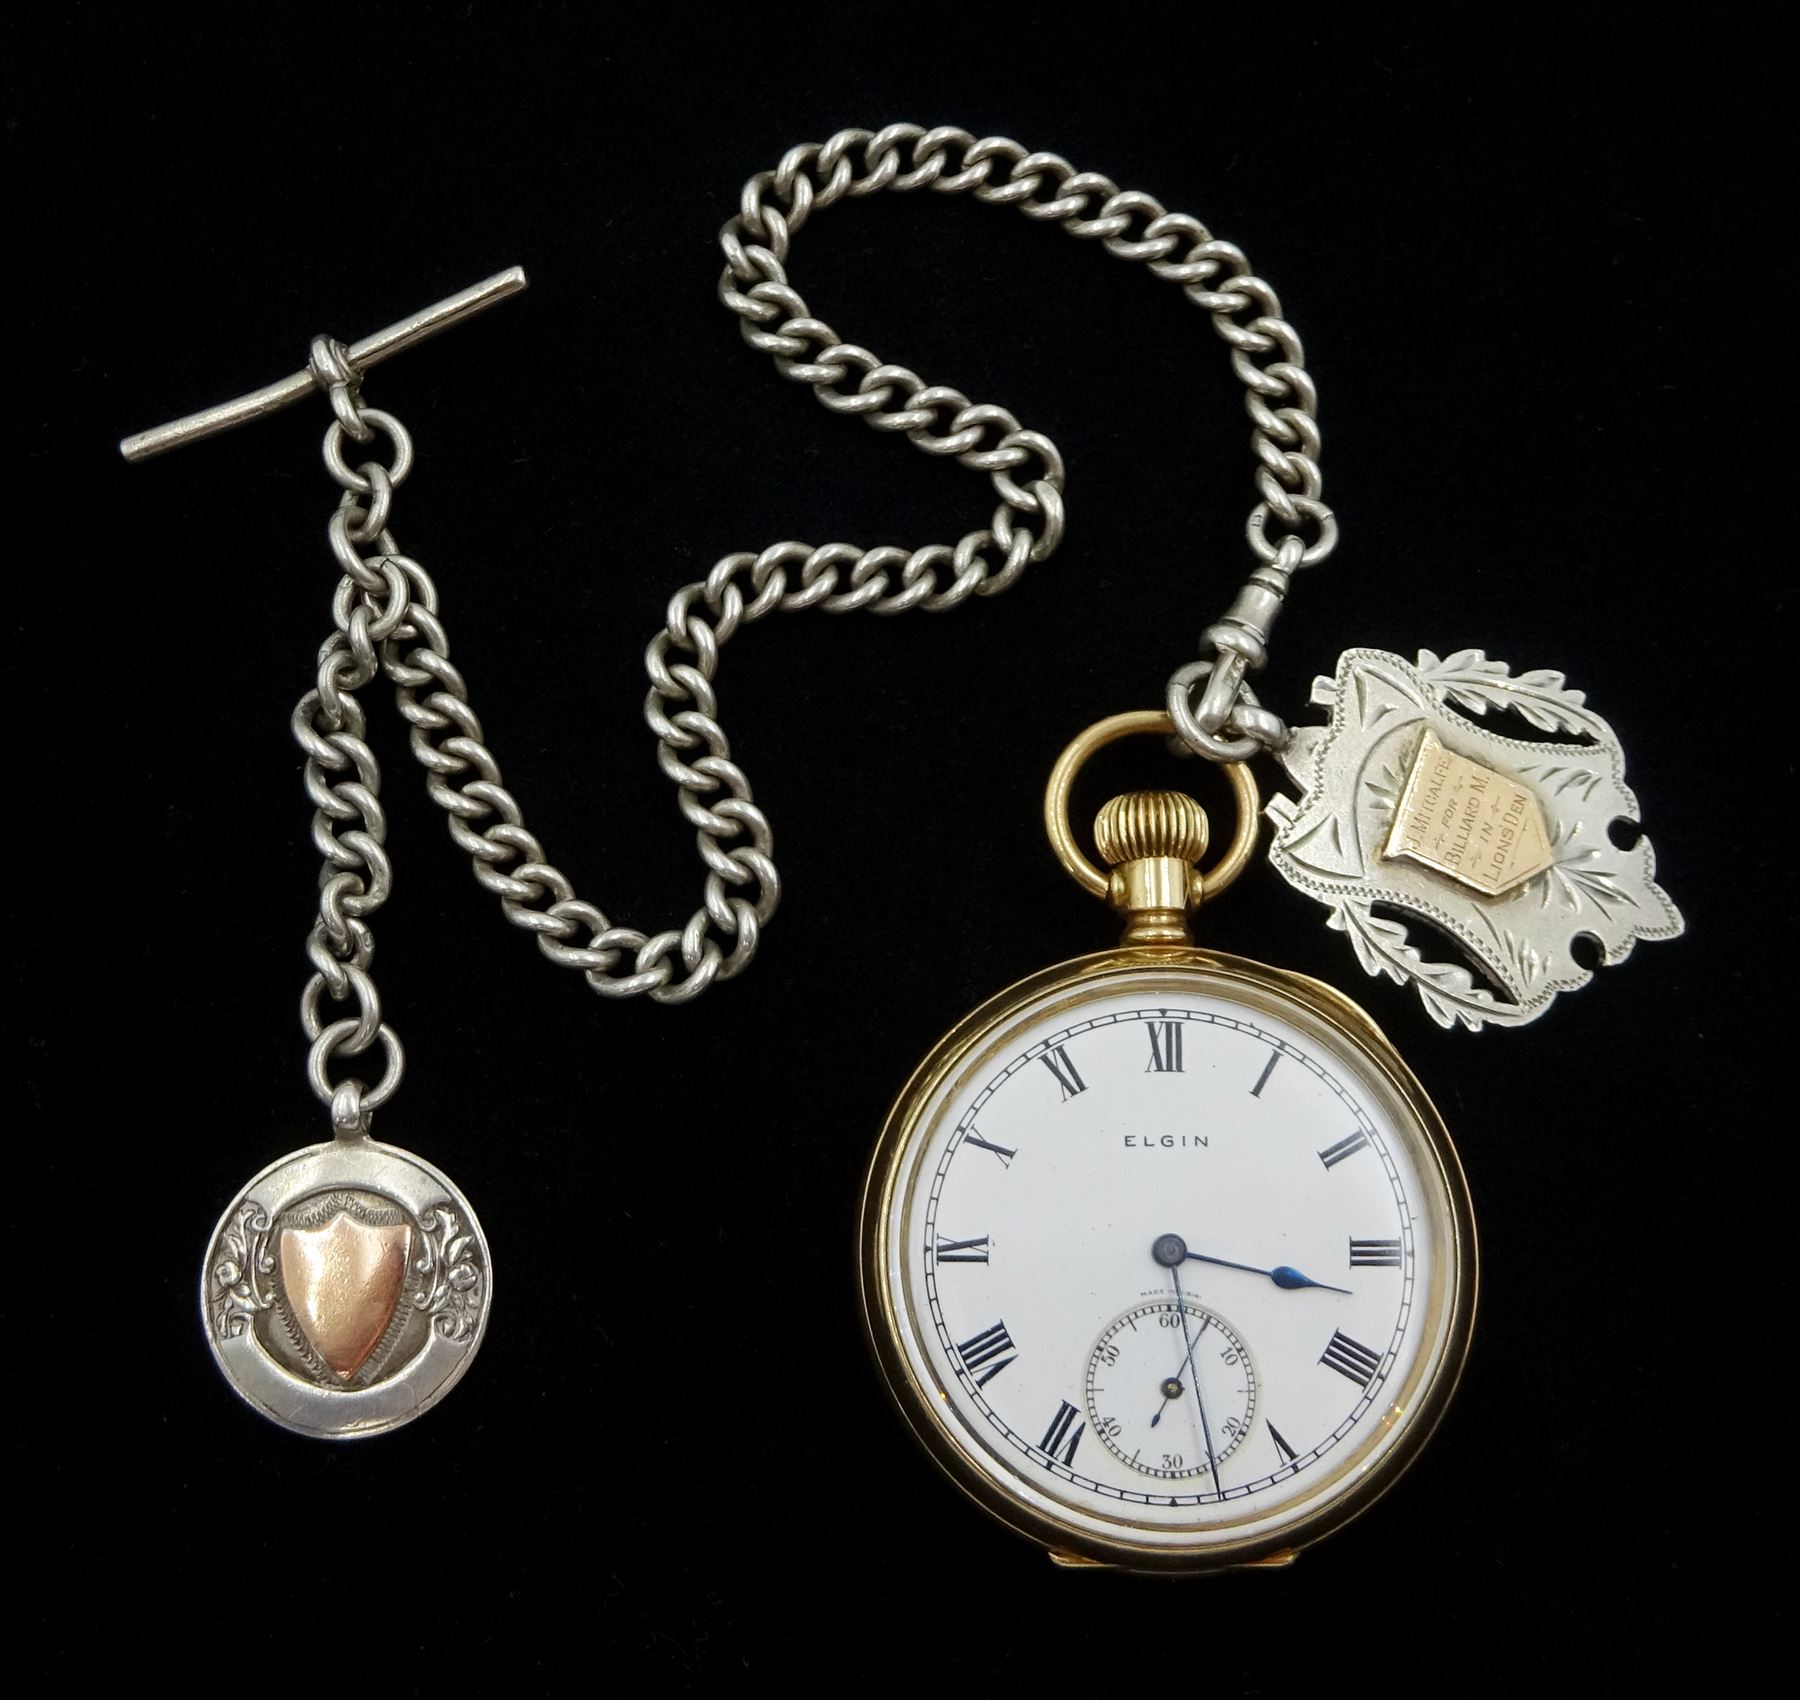 Early 20th century gold-plated keyless lever pocket watch by Elgin